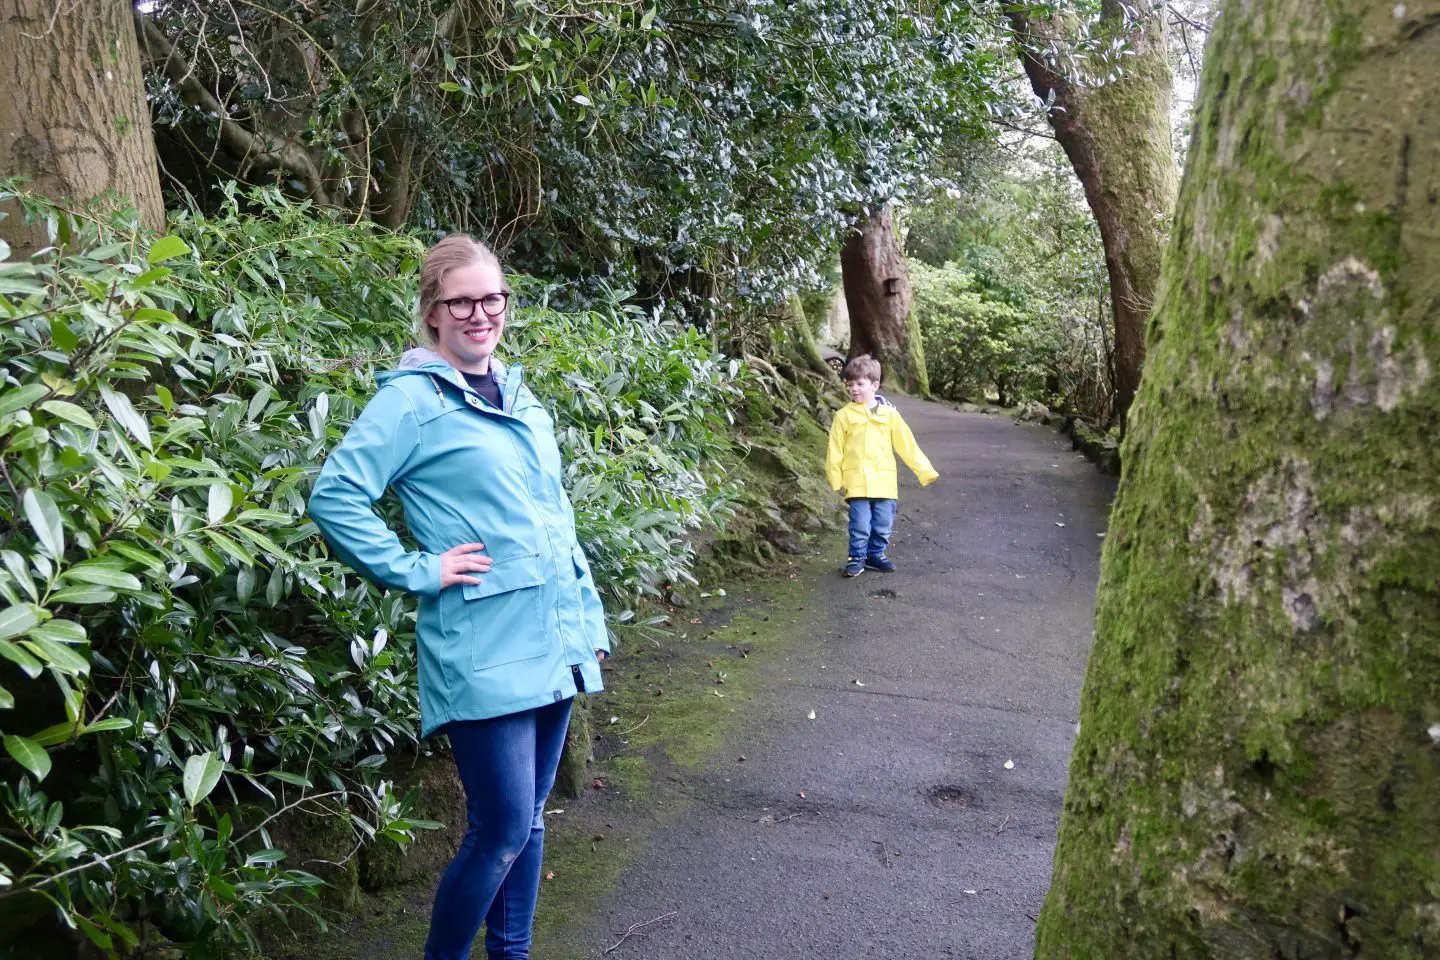 A woman standing in a teal jacket in a park, while a boy in a bright yellow jacket is in the background